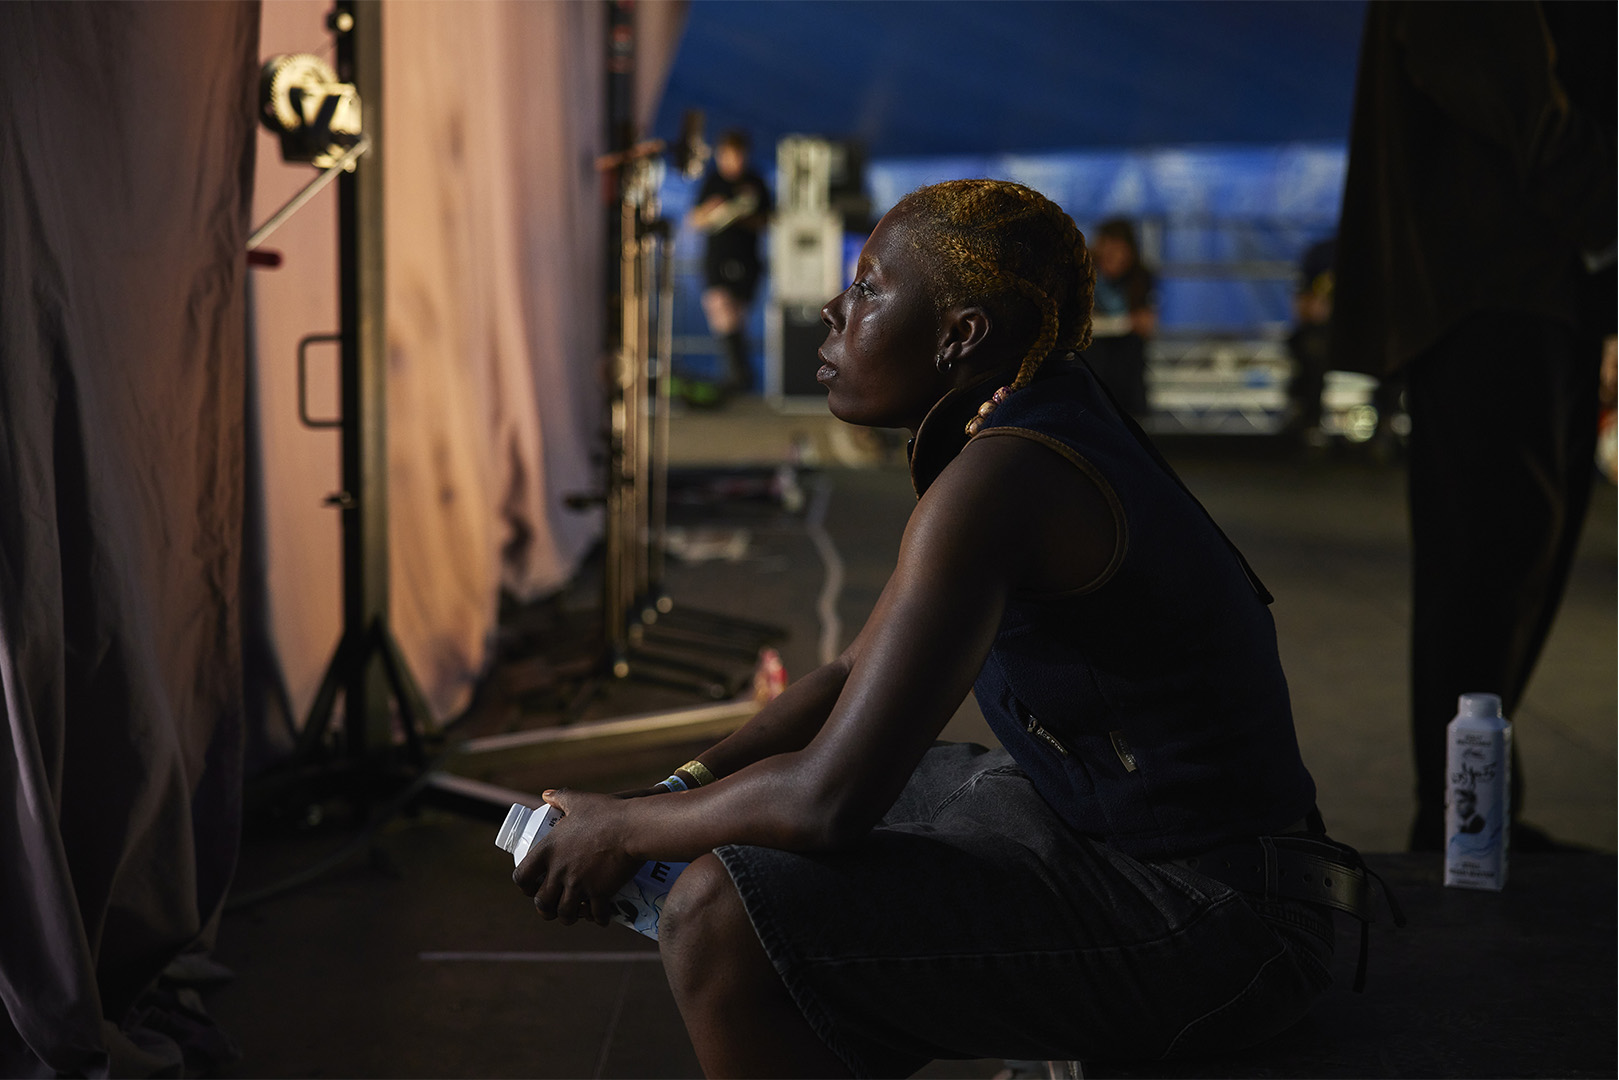 Bukky back stage at Electric Picnic with Three Ireland